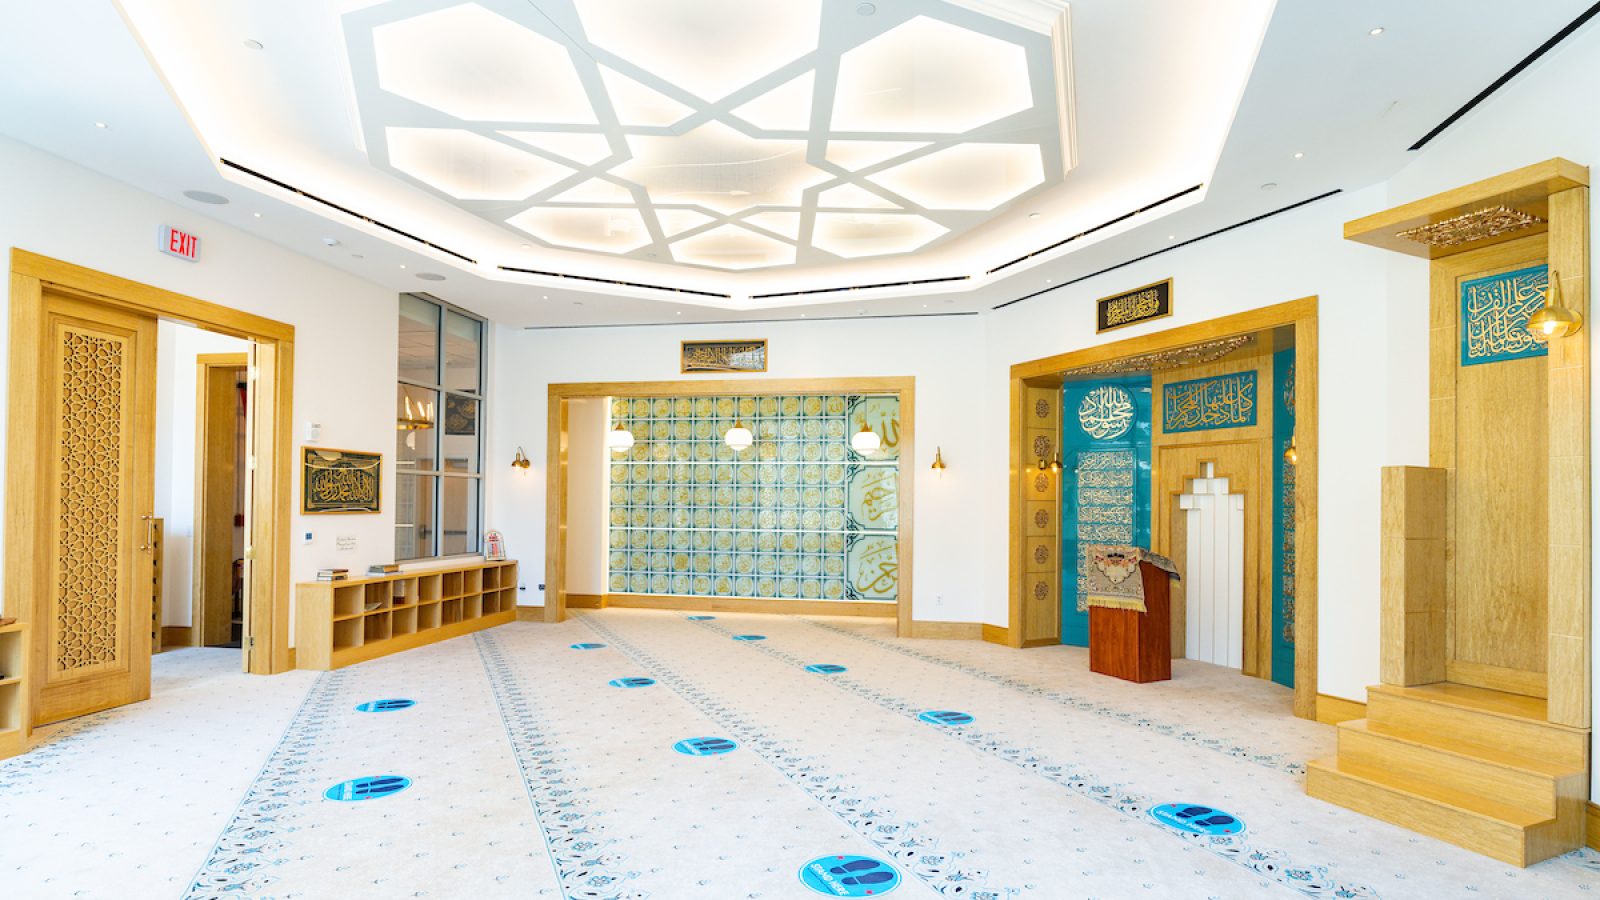 Inside the Yarrow Mamout Masjid the walls are lined with decorative gold and teal blue decor